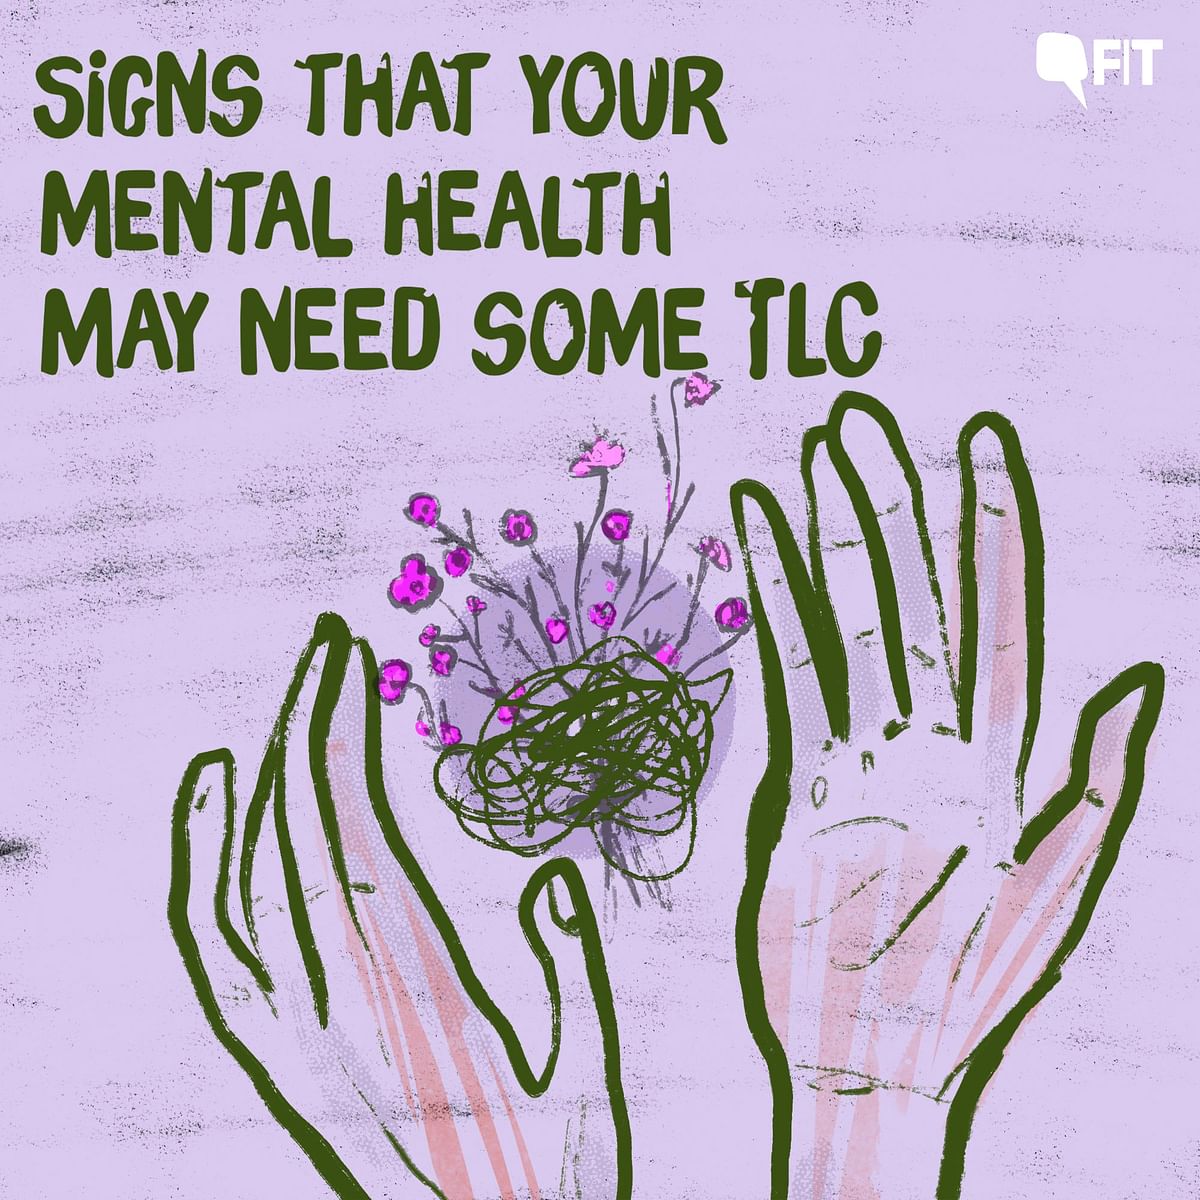 COVID-19 Lockdown: Signs Your Mental Health Needs Some TLC